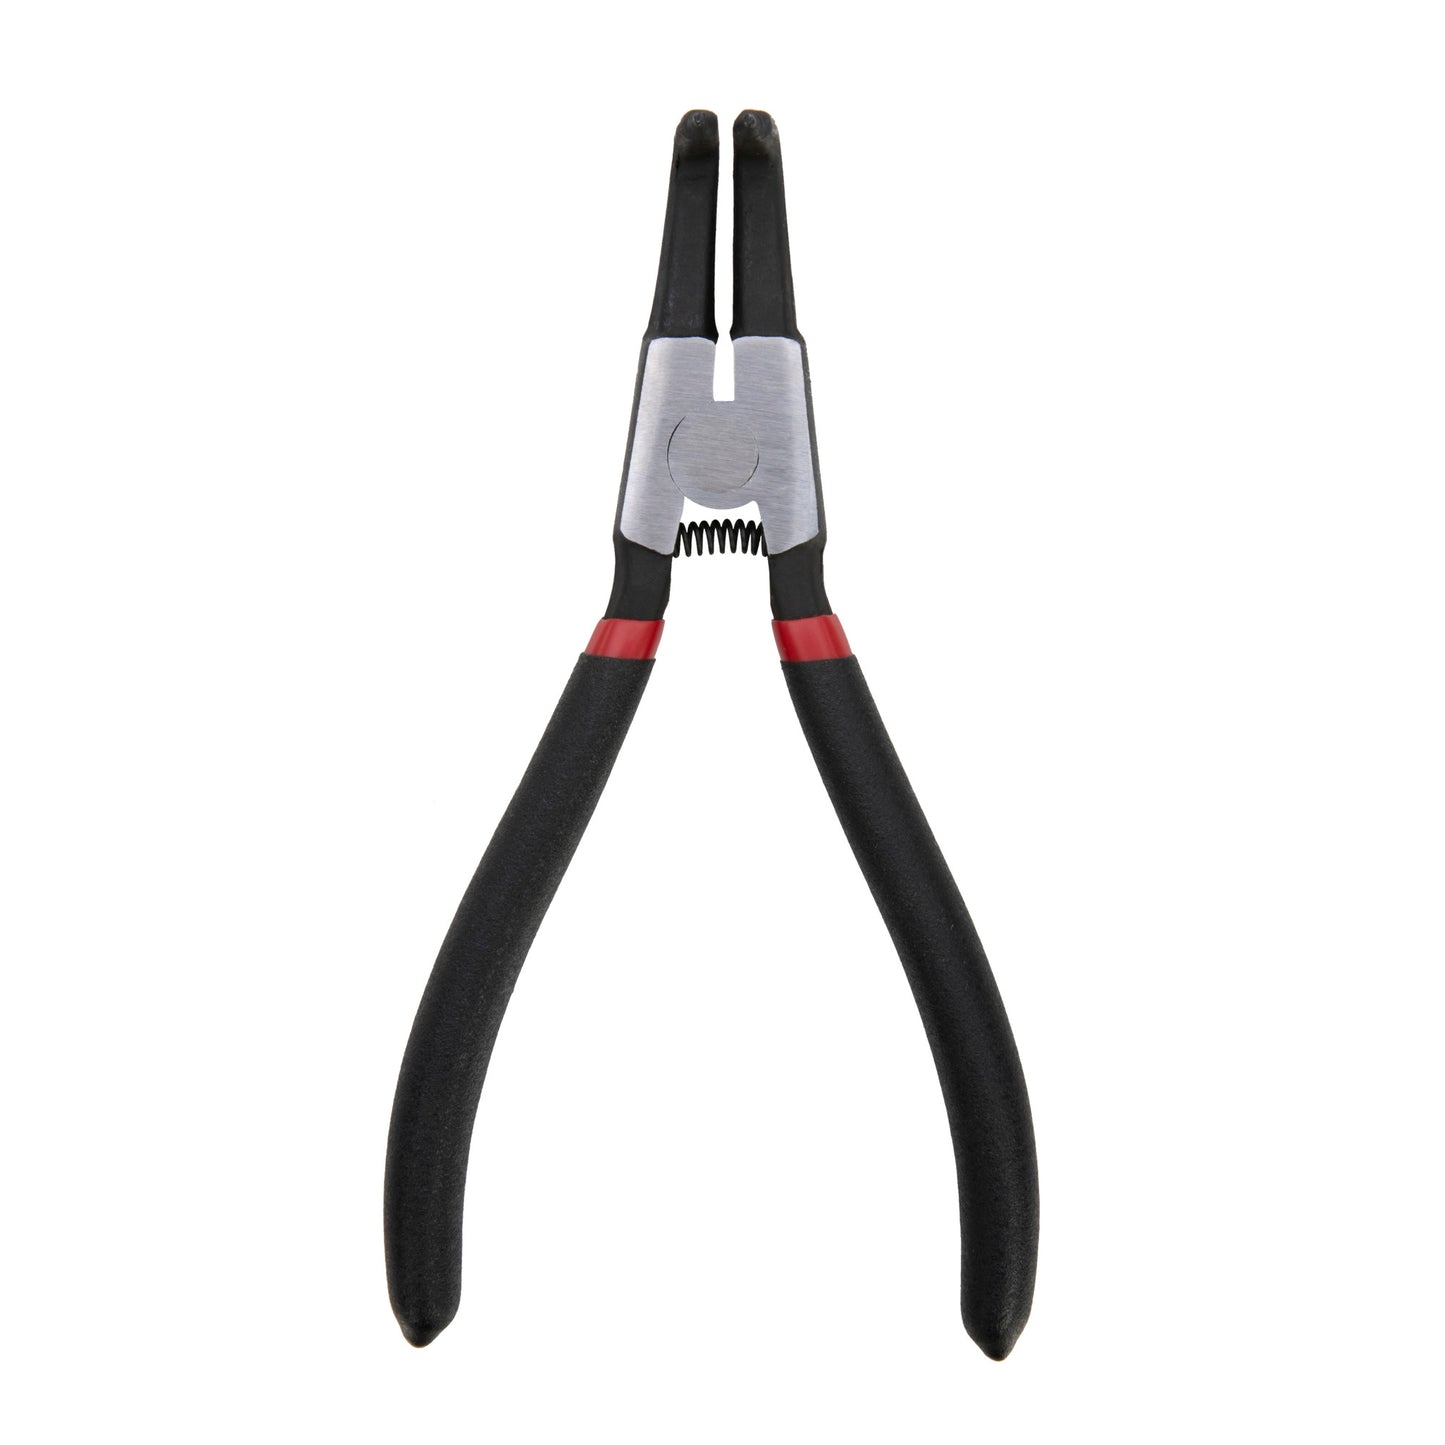 Straight and 90-Degree Offset 7-inch Snap-Ring Pliers, Internal and External, Set of 4